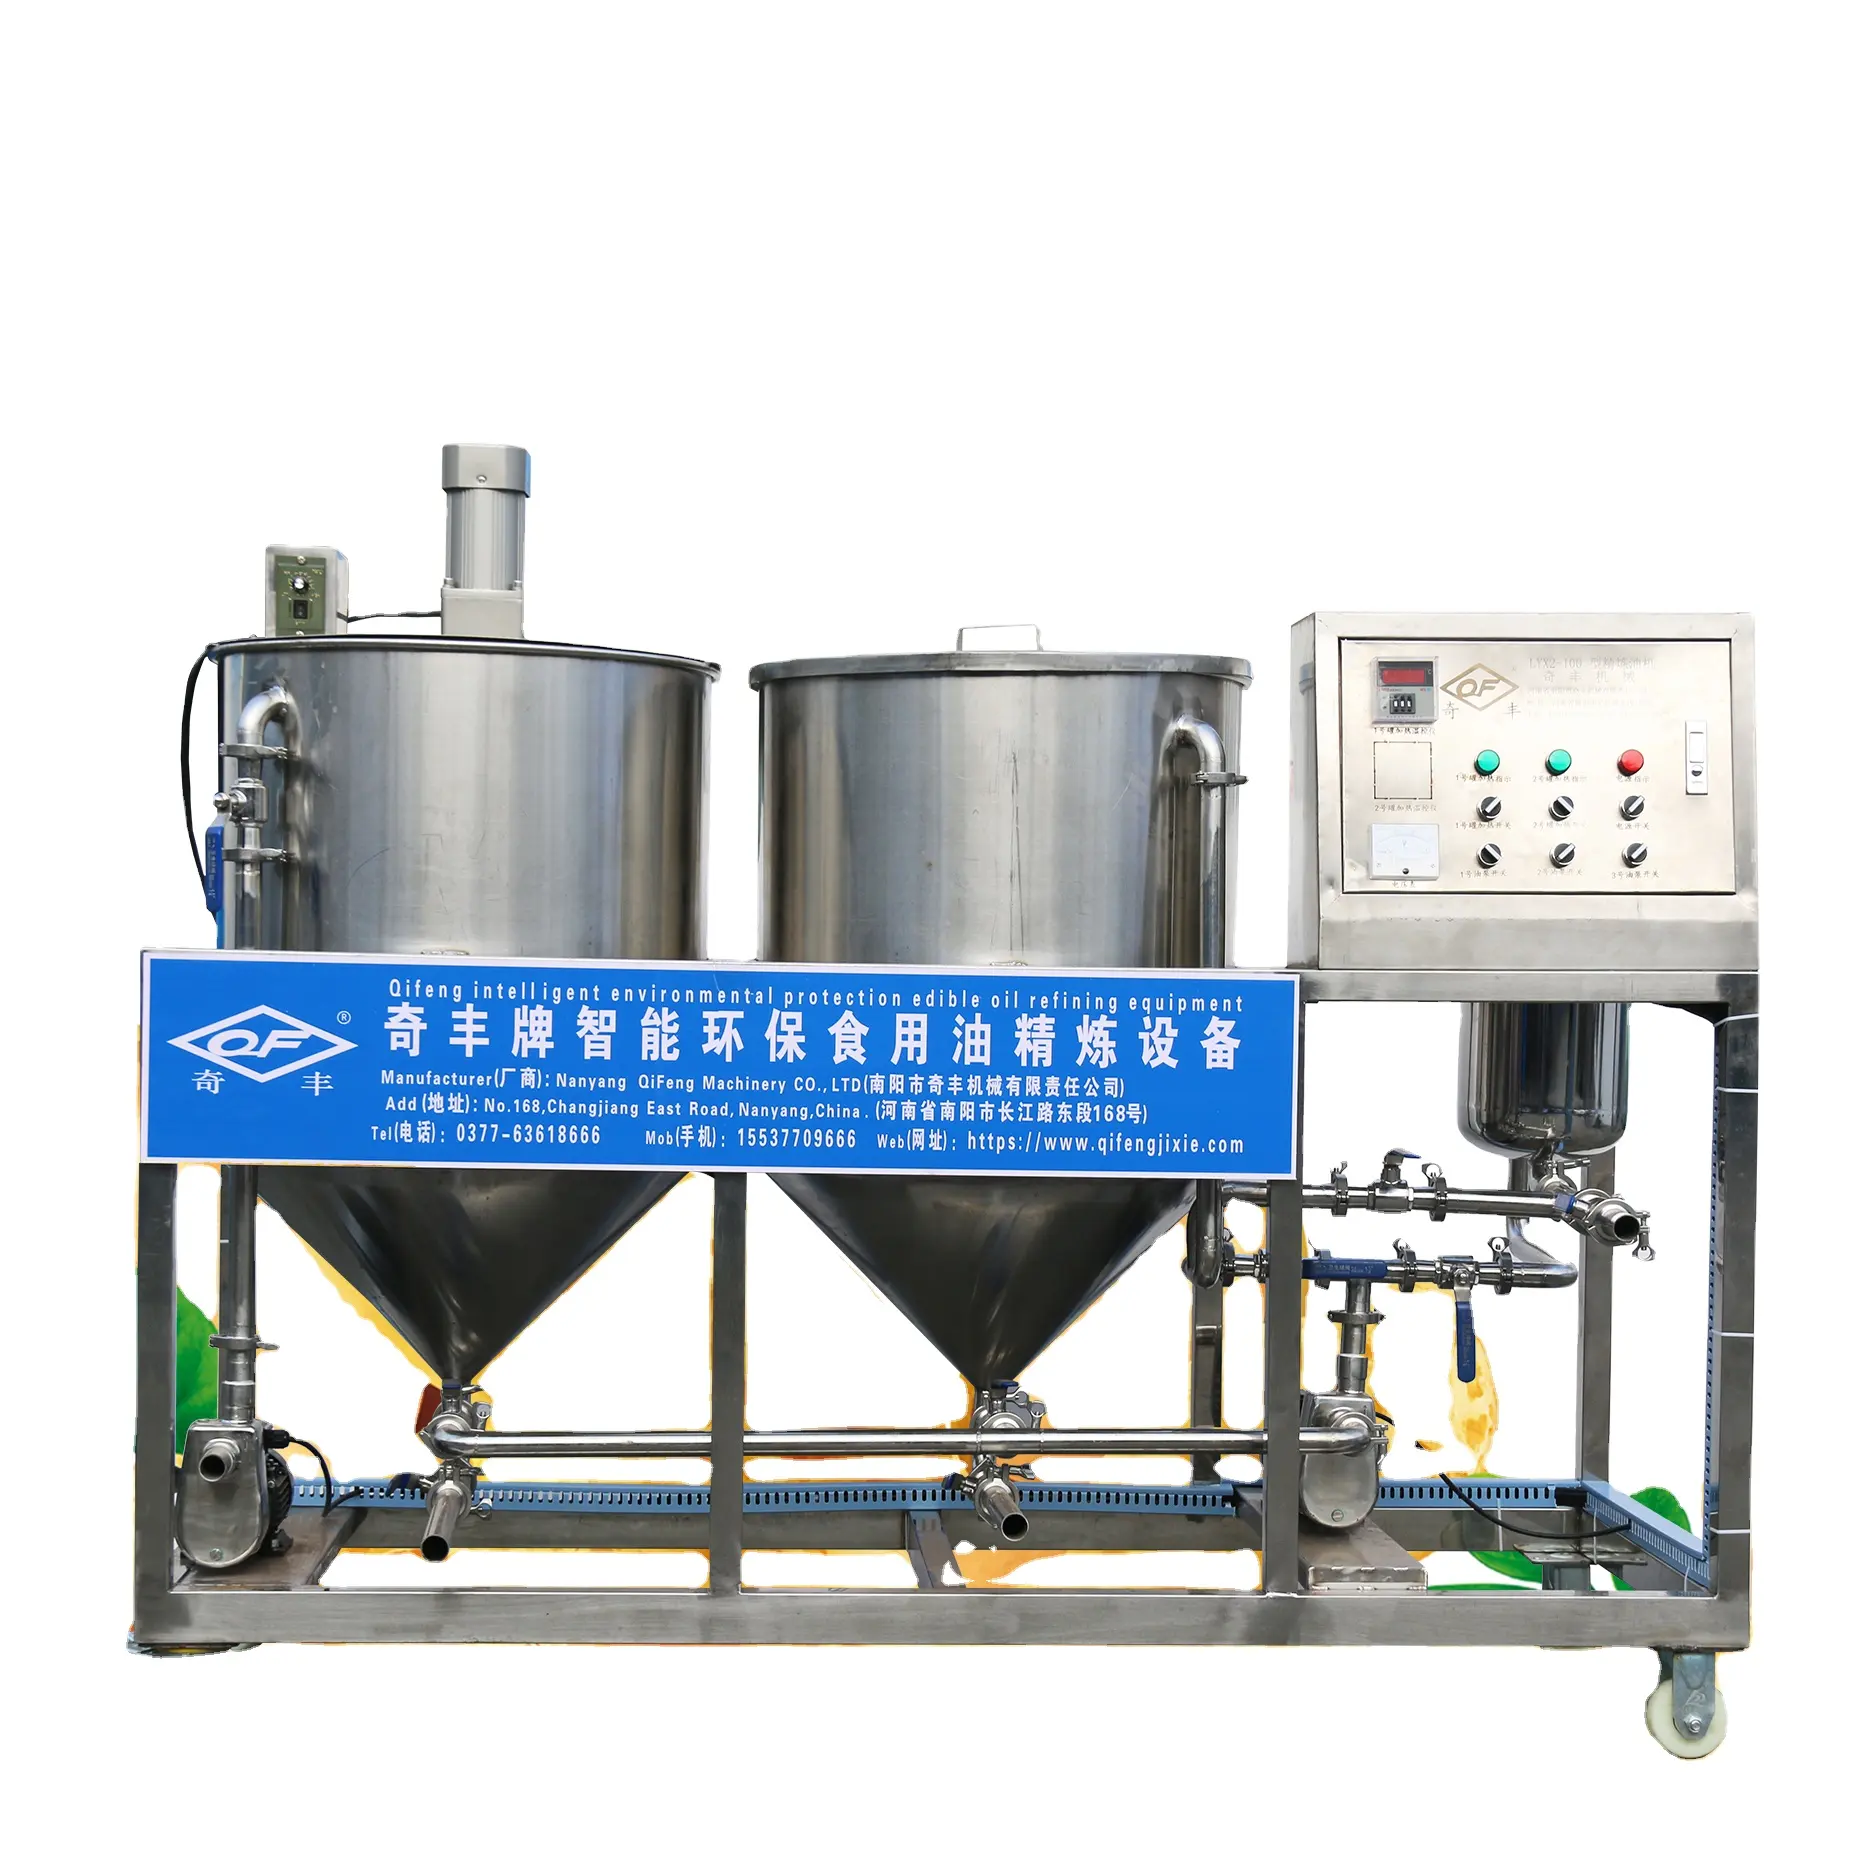 Good quality small scale oil refining machine crude oil refinery equipment